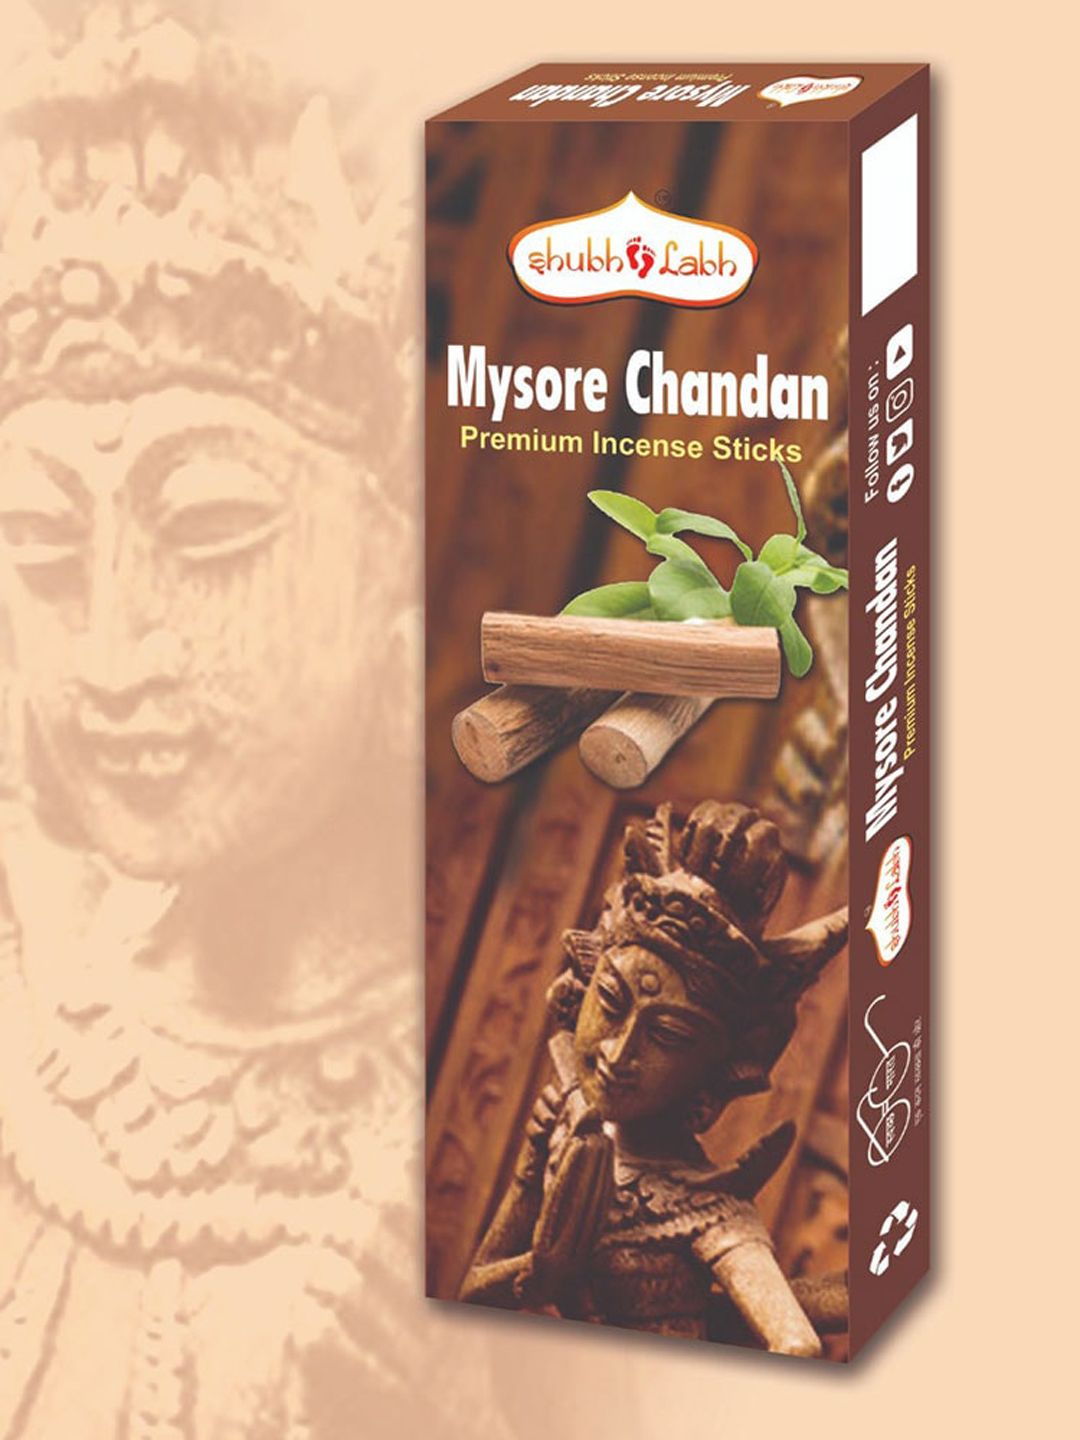 Shubh Labh Pack Of 6 Mysore Chandan Fragrances Incense Sticks Boxes Price in India